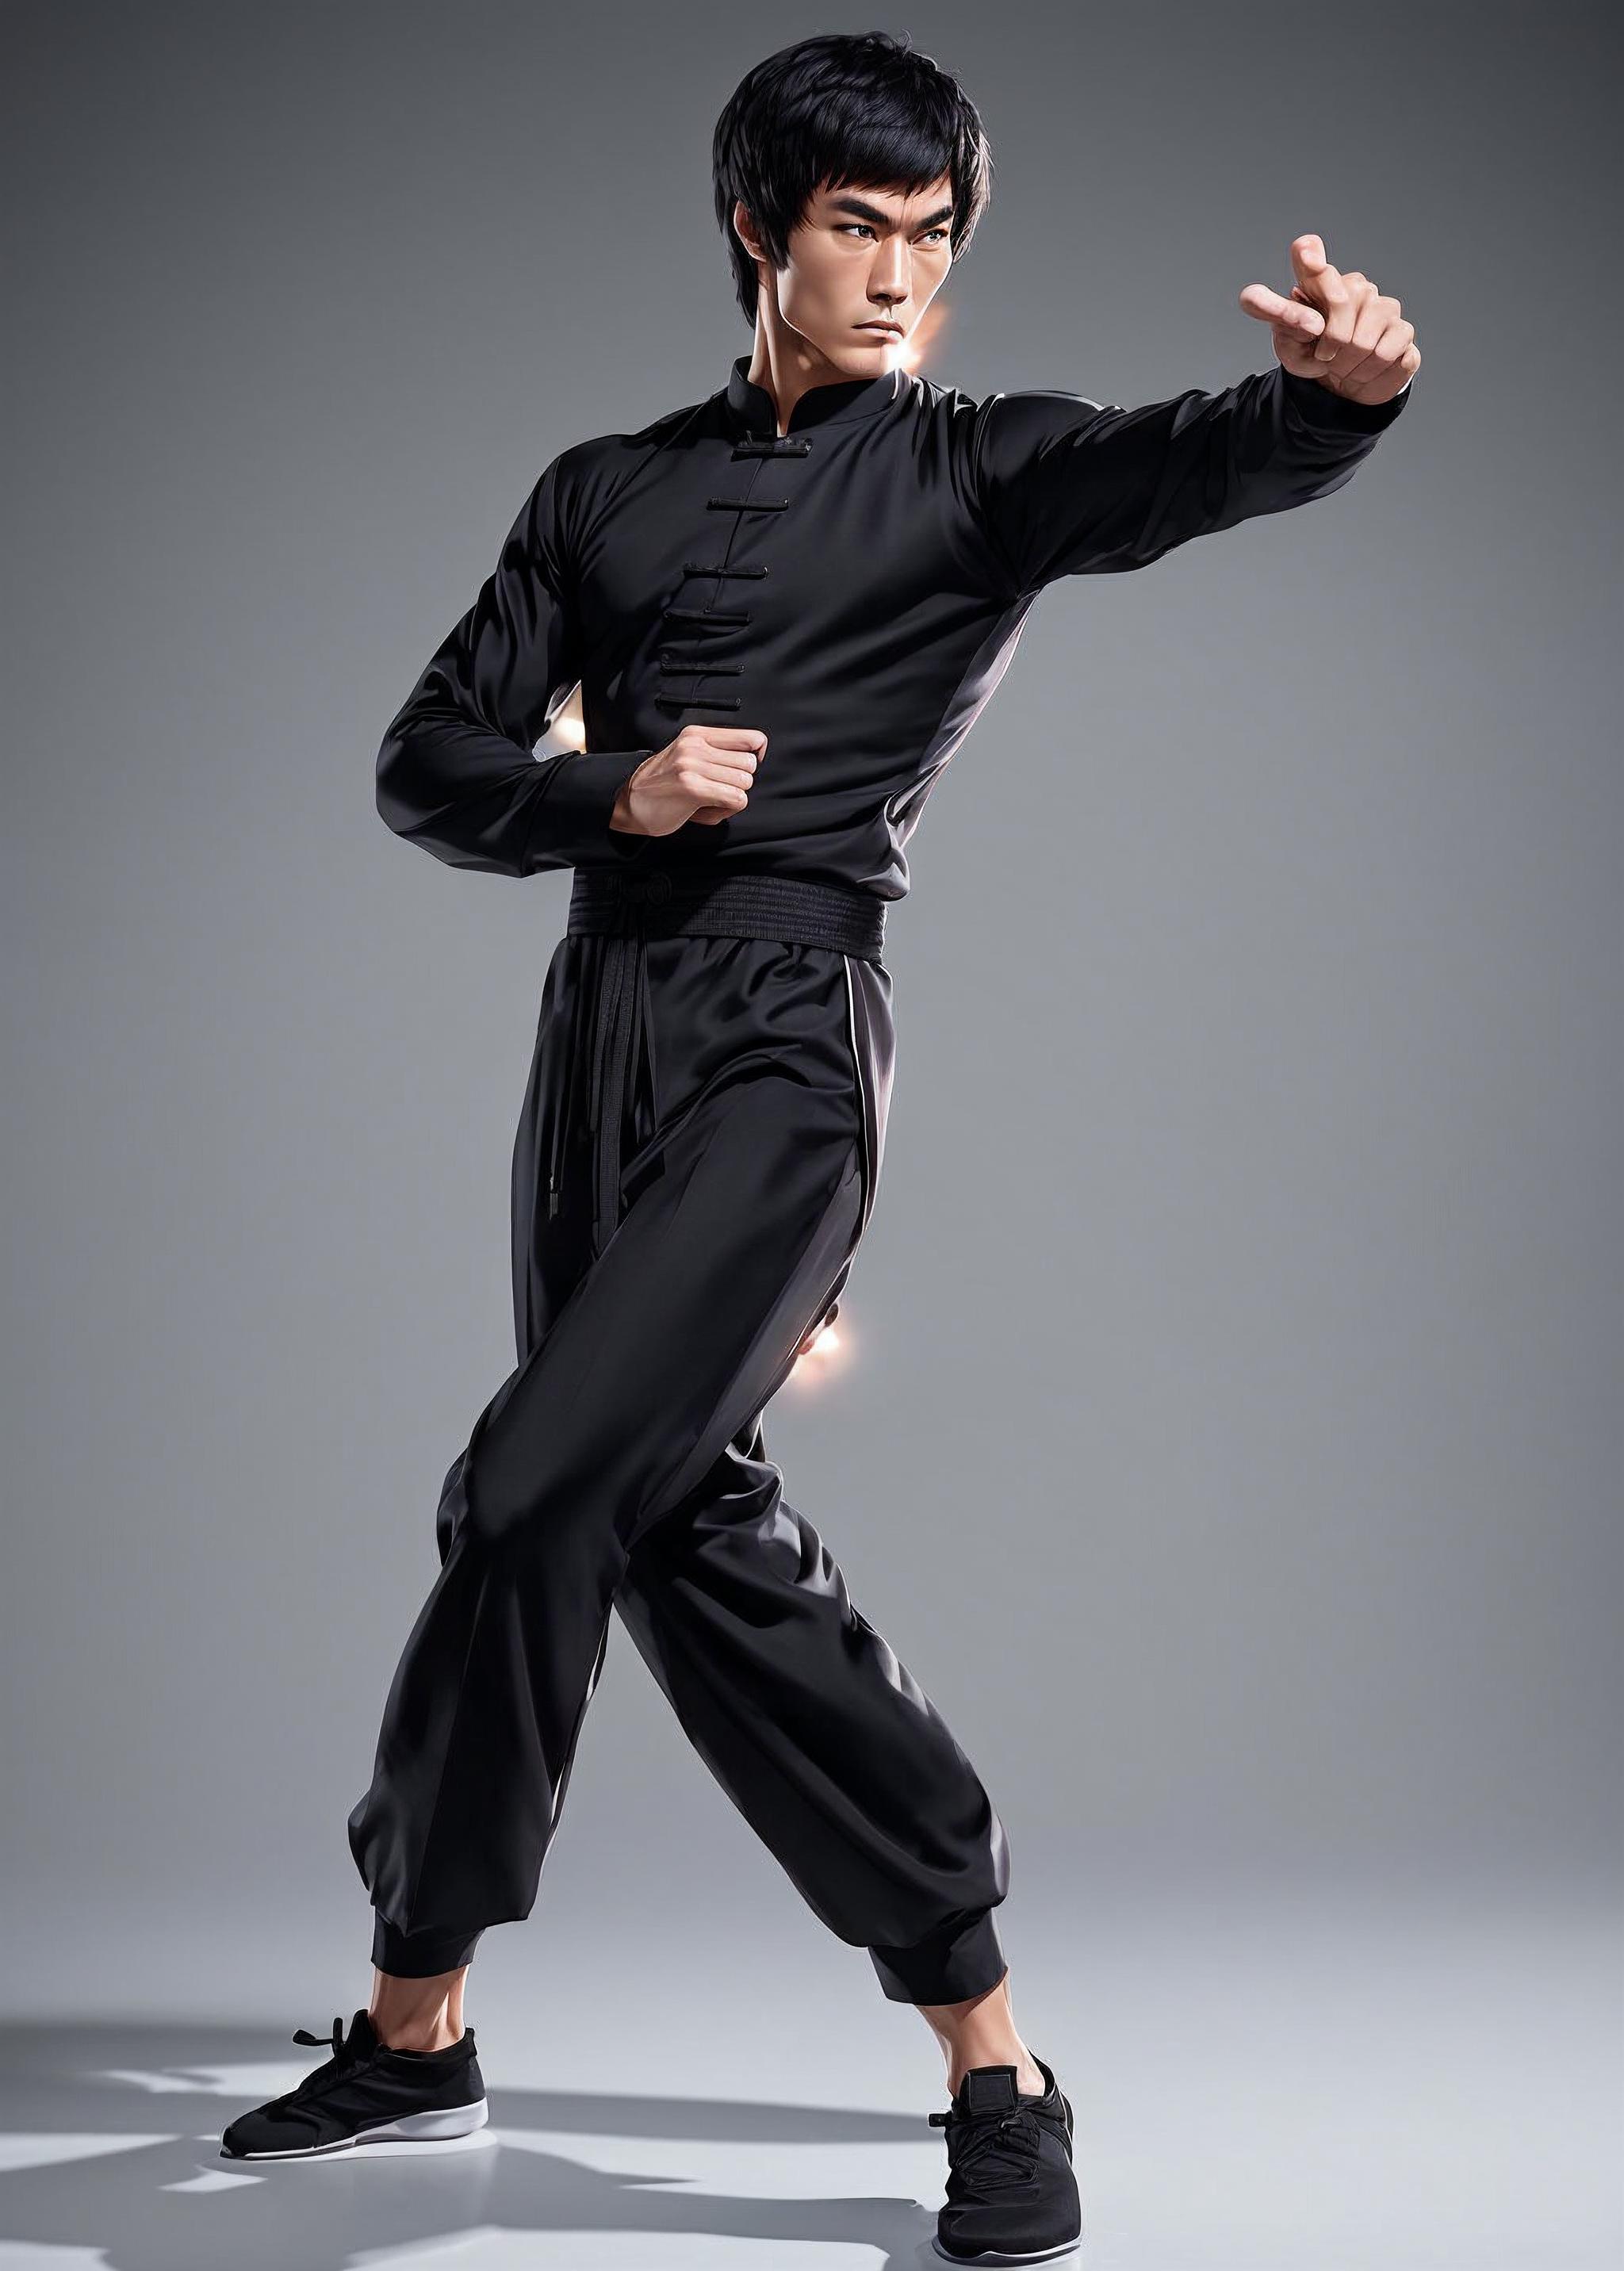 A man in a black suit and pants performing a martial arts move.